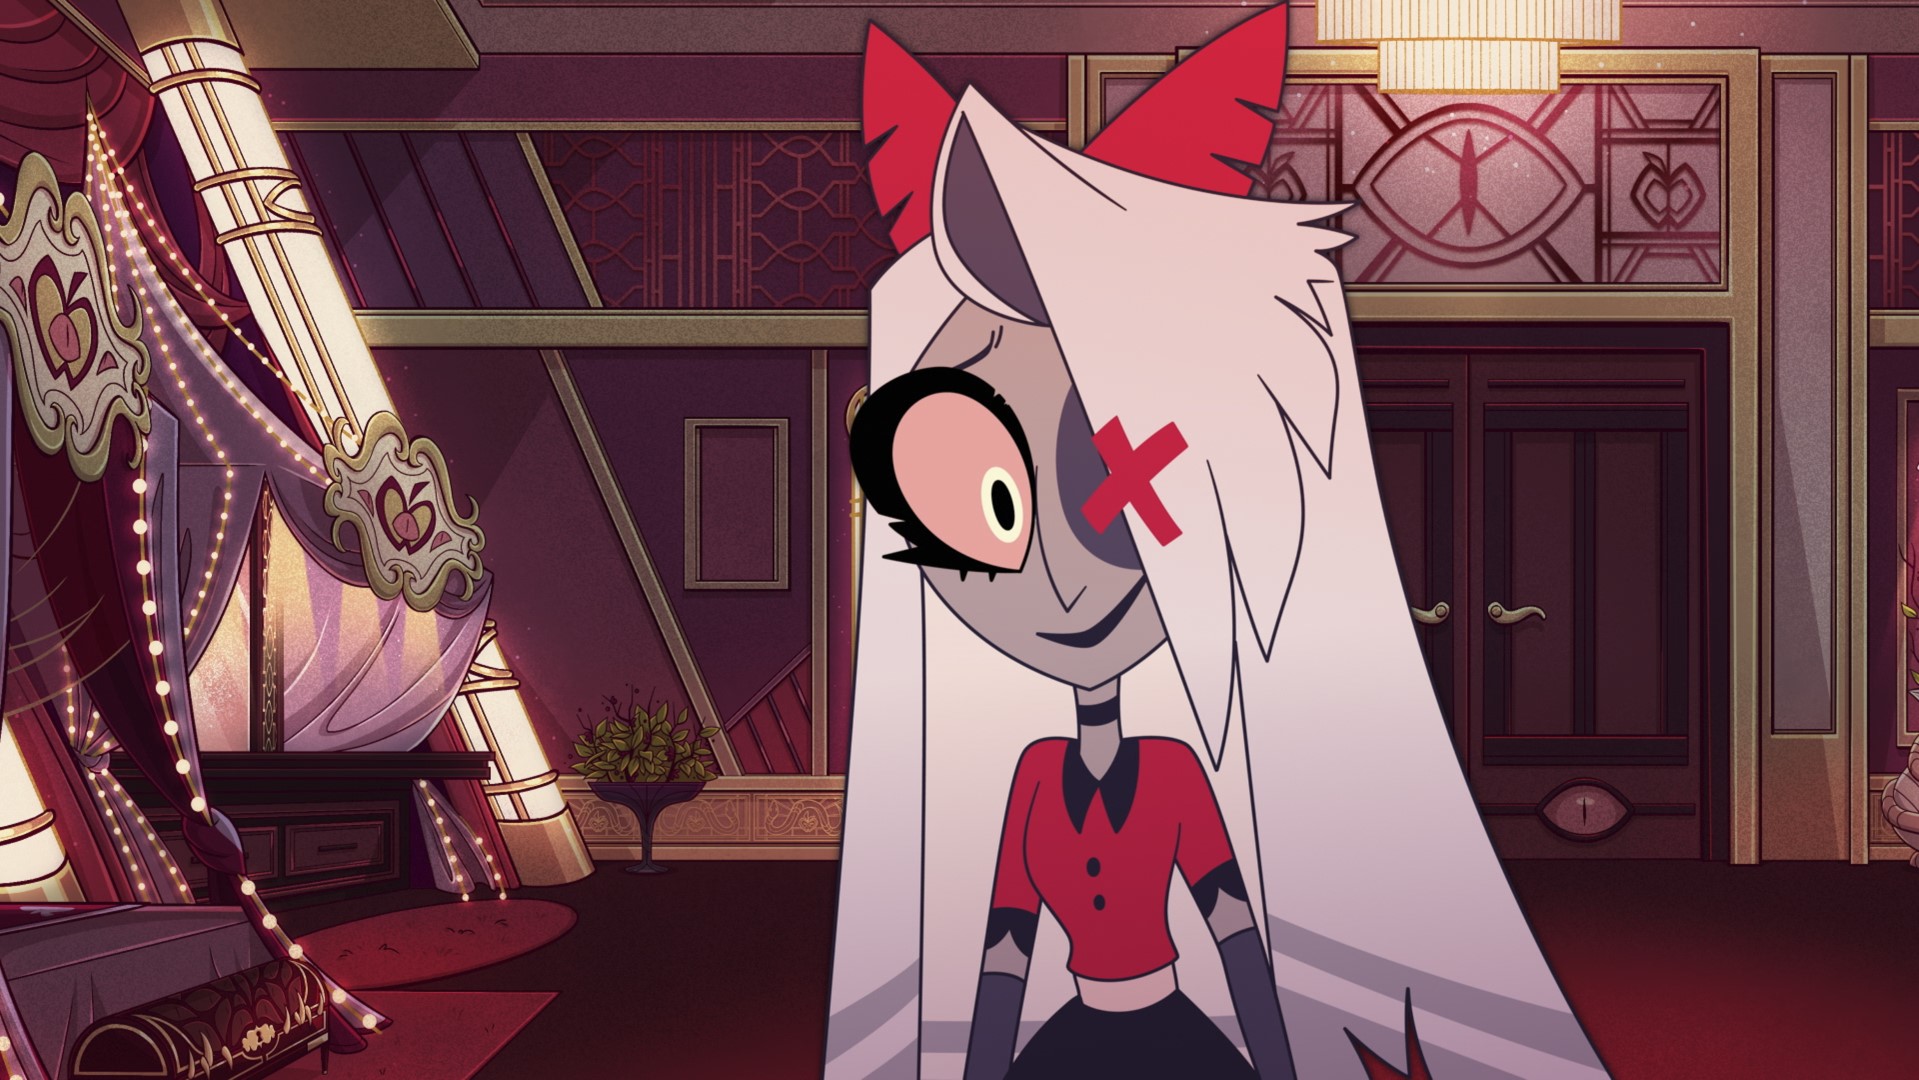 An image of Vaggie played by Stephanie Beatriz from Hazbin Hotel